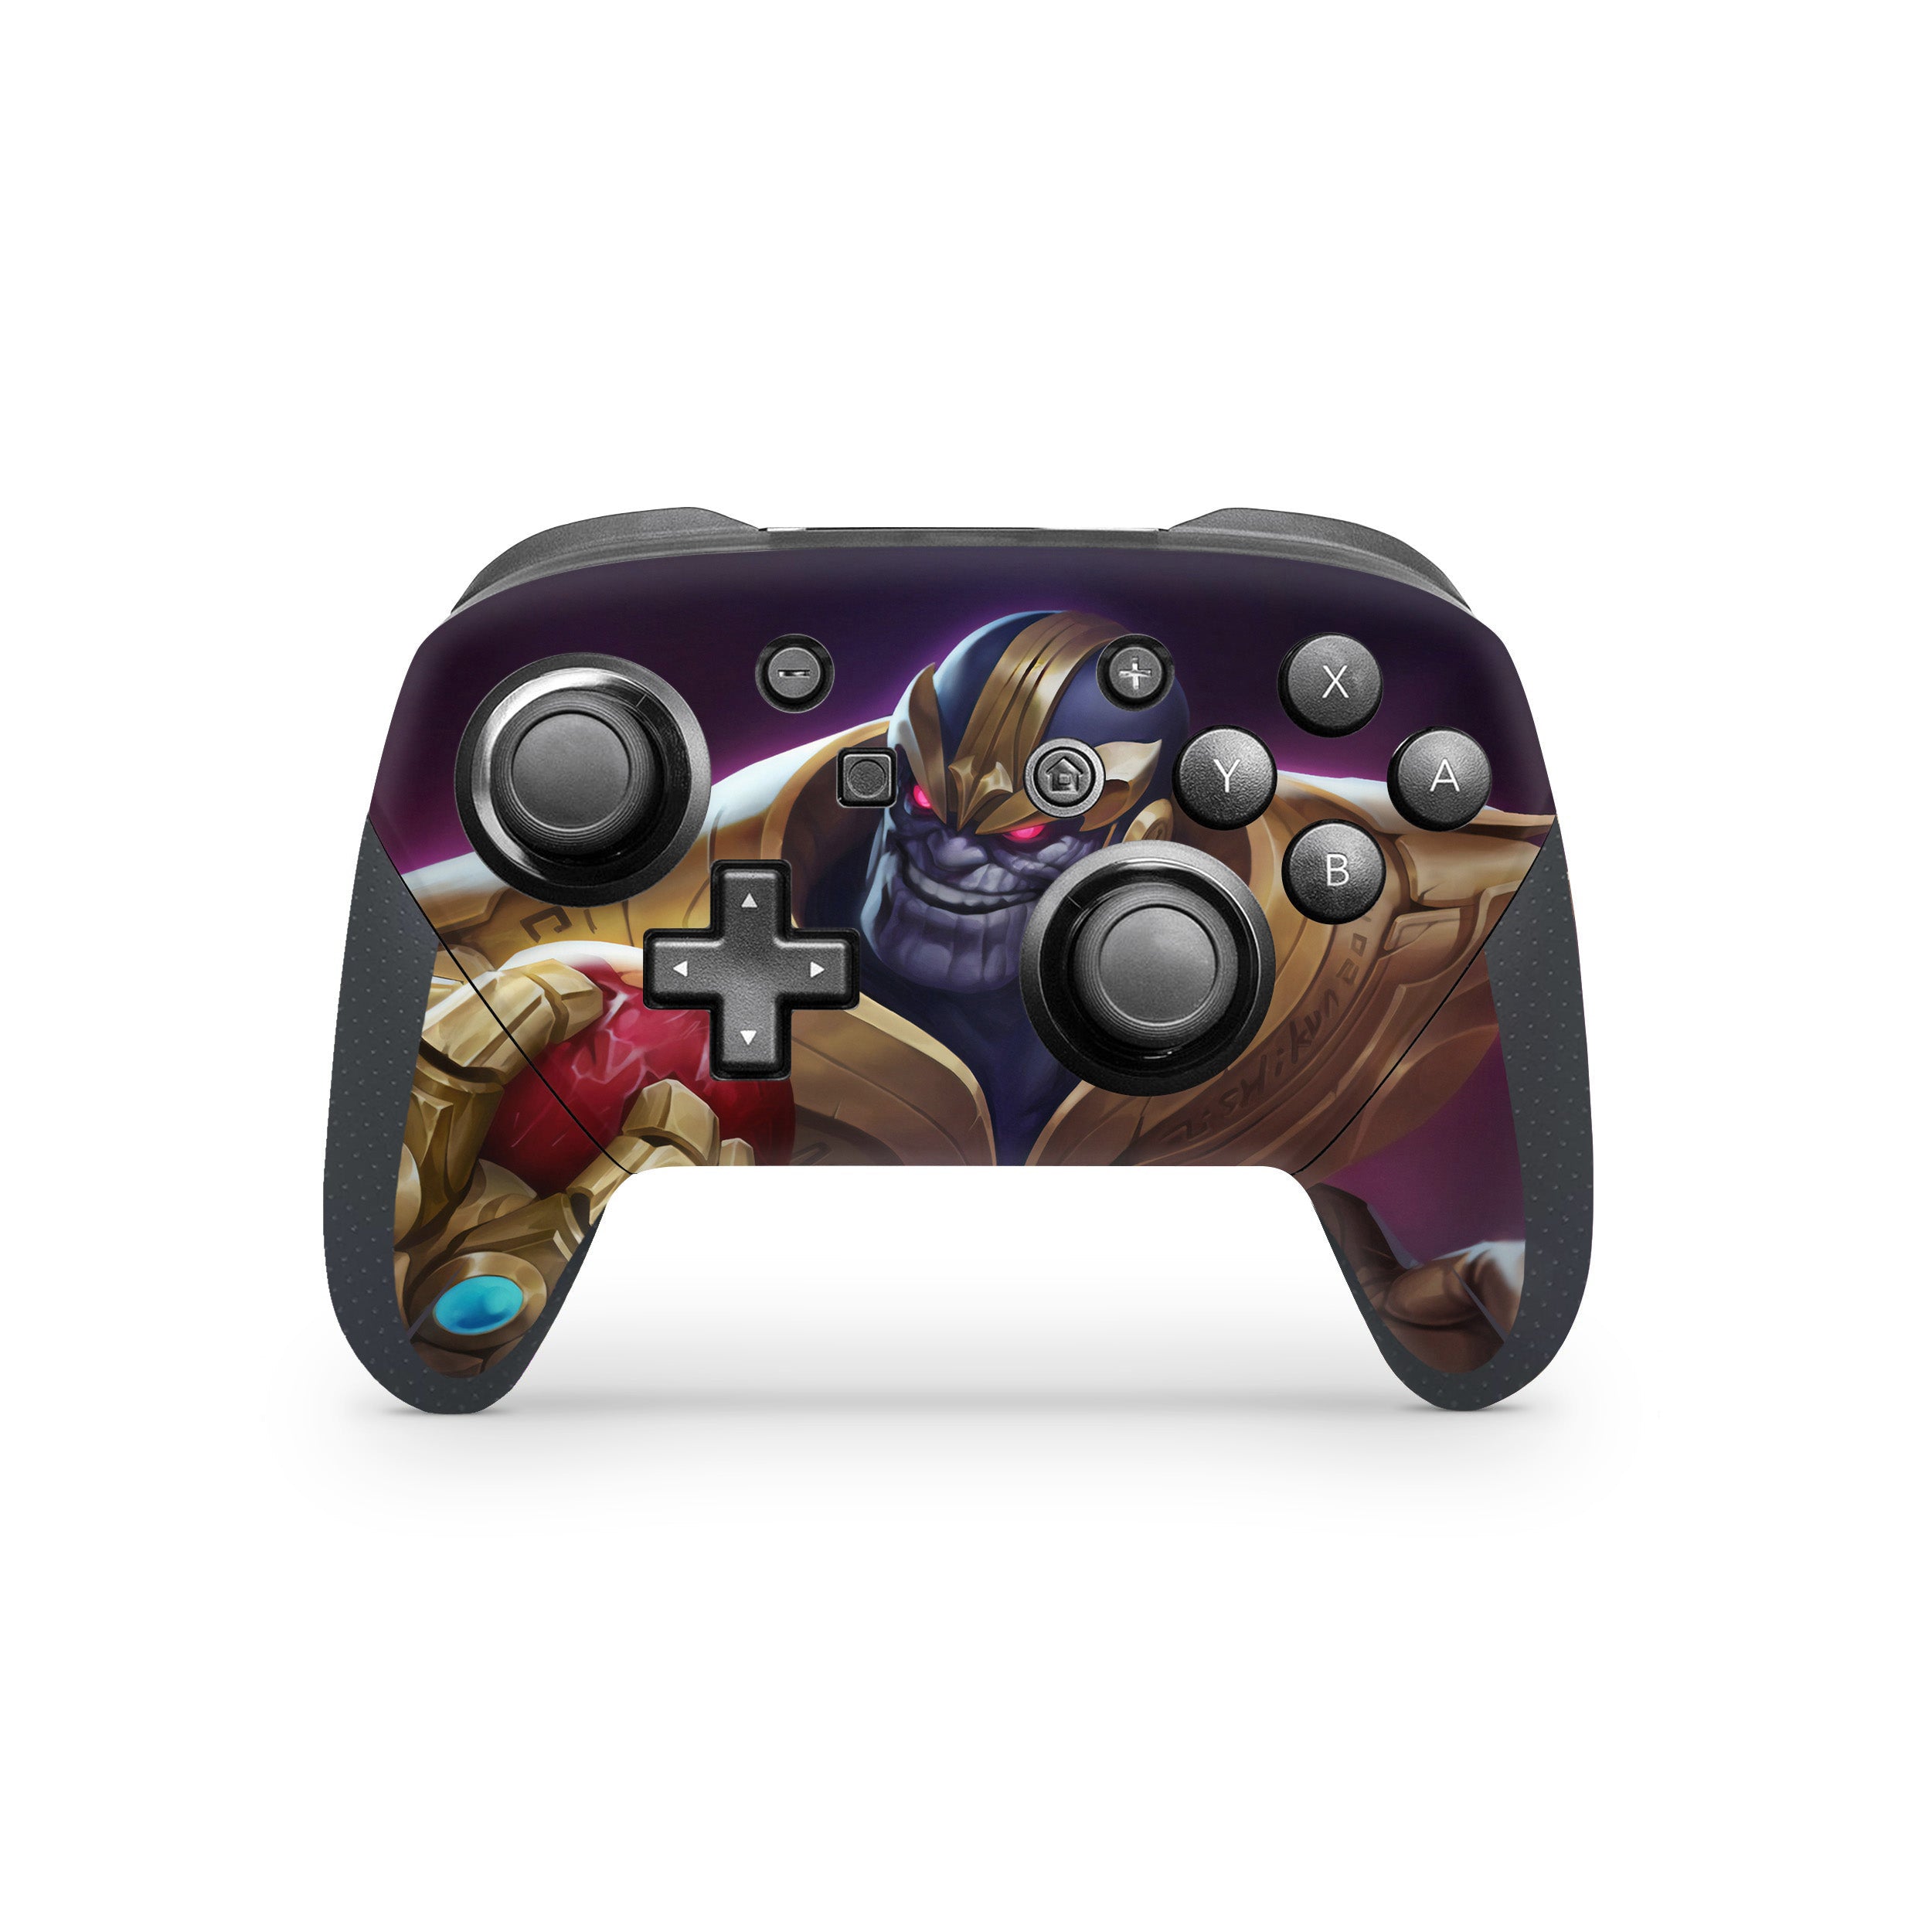 A video game skin featuring a Marvel Comics Thanos design for the Switch Pro Controller.